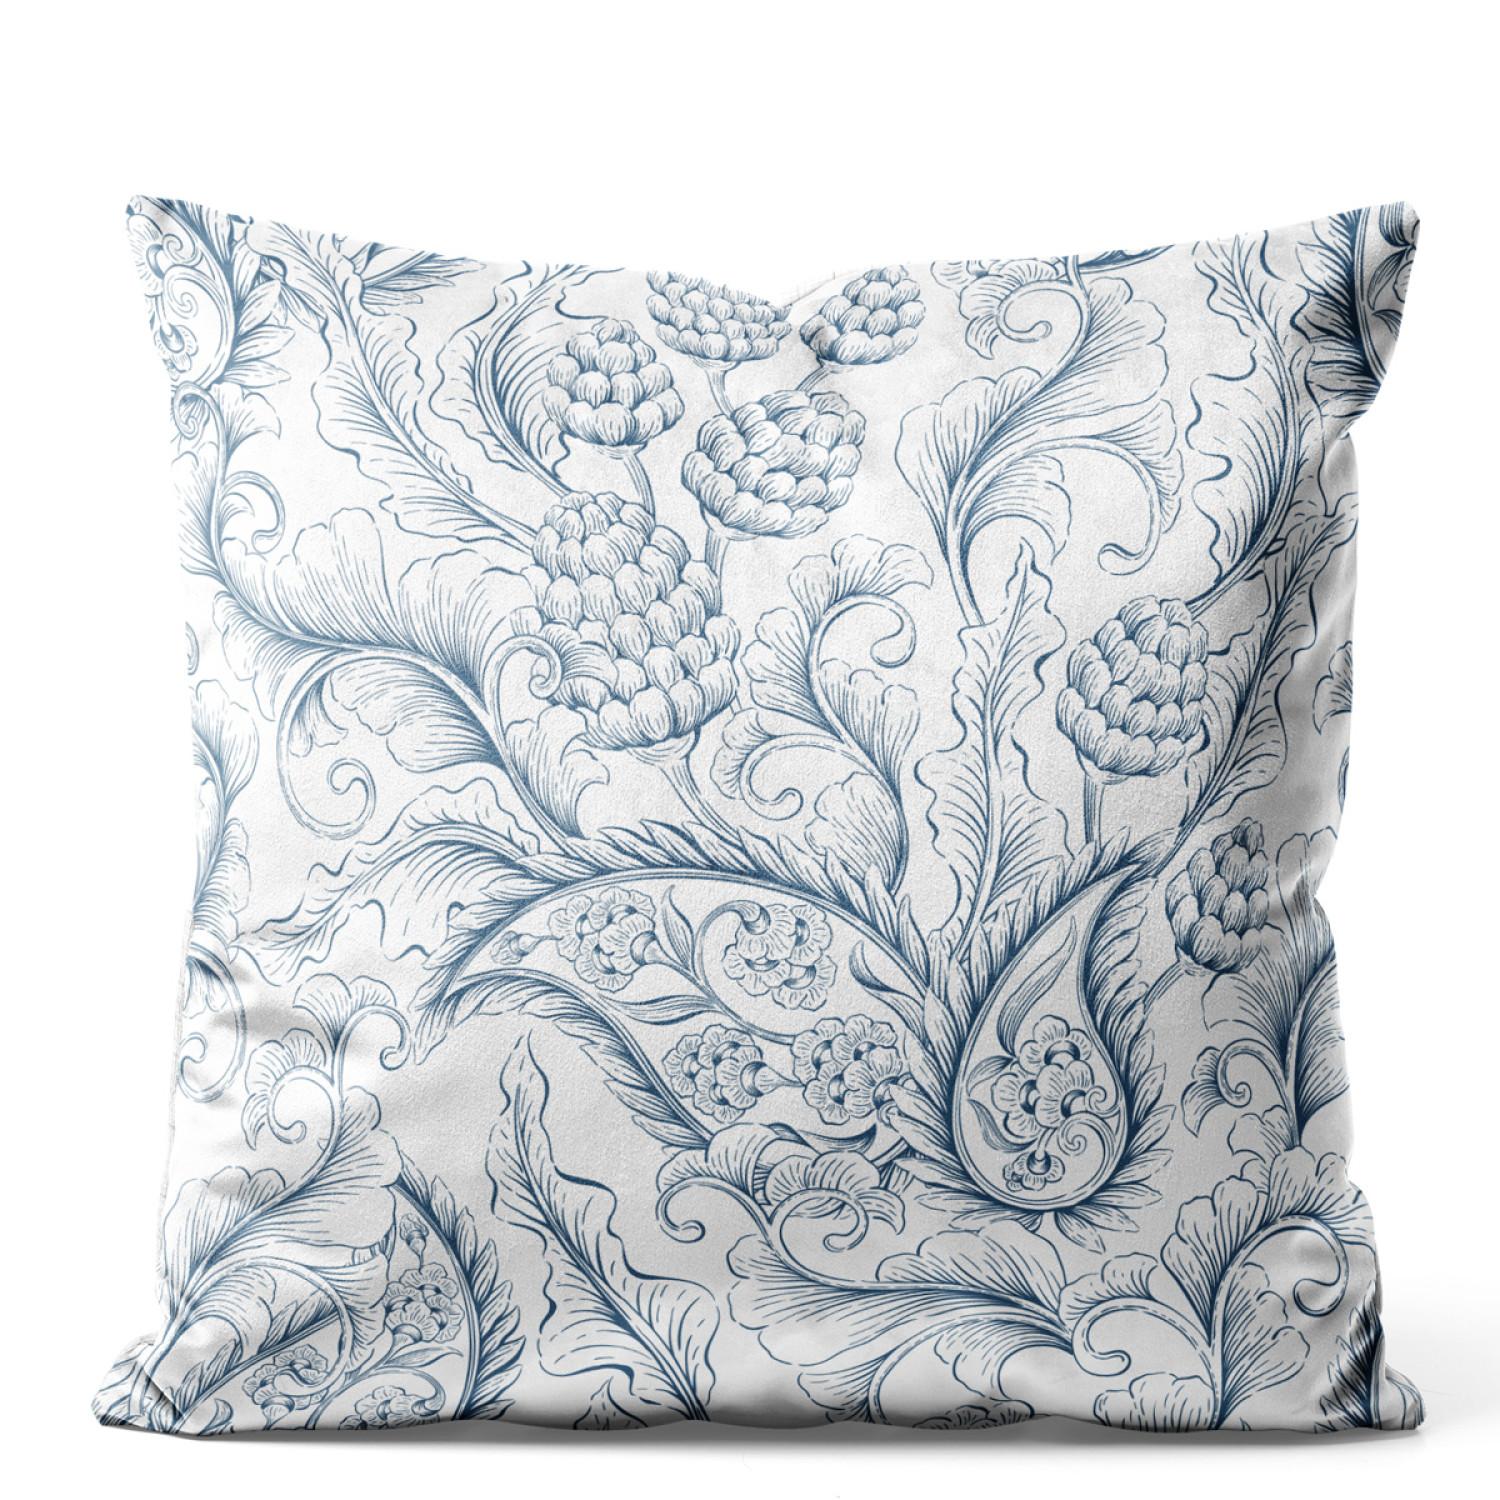 Cojin de velour Stylised leaves - minimalist, white and blue floral theme